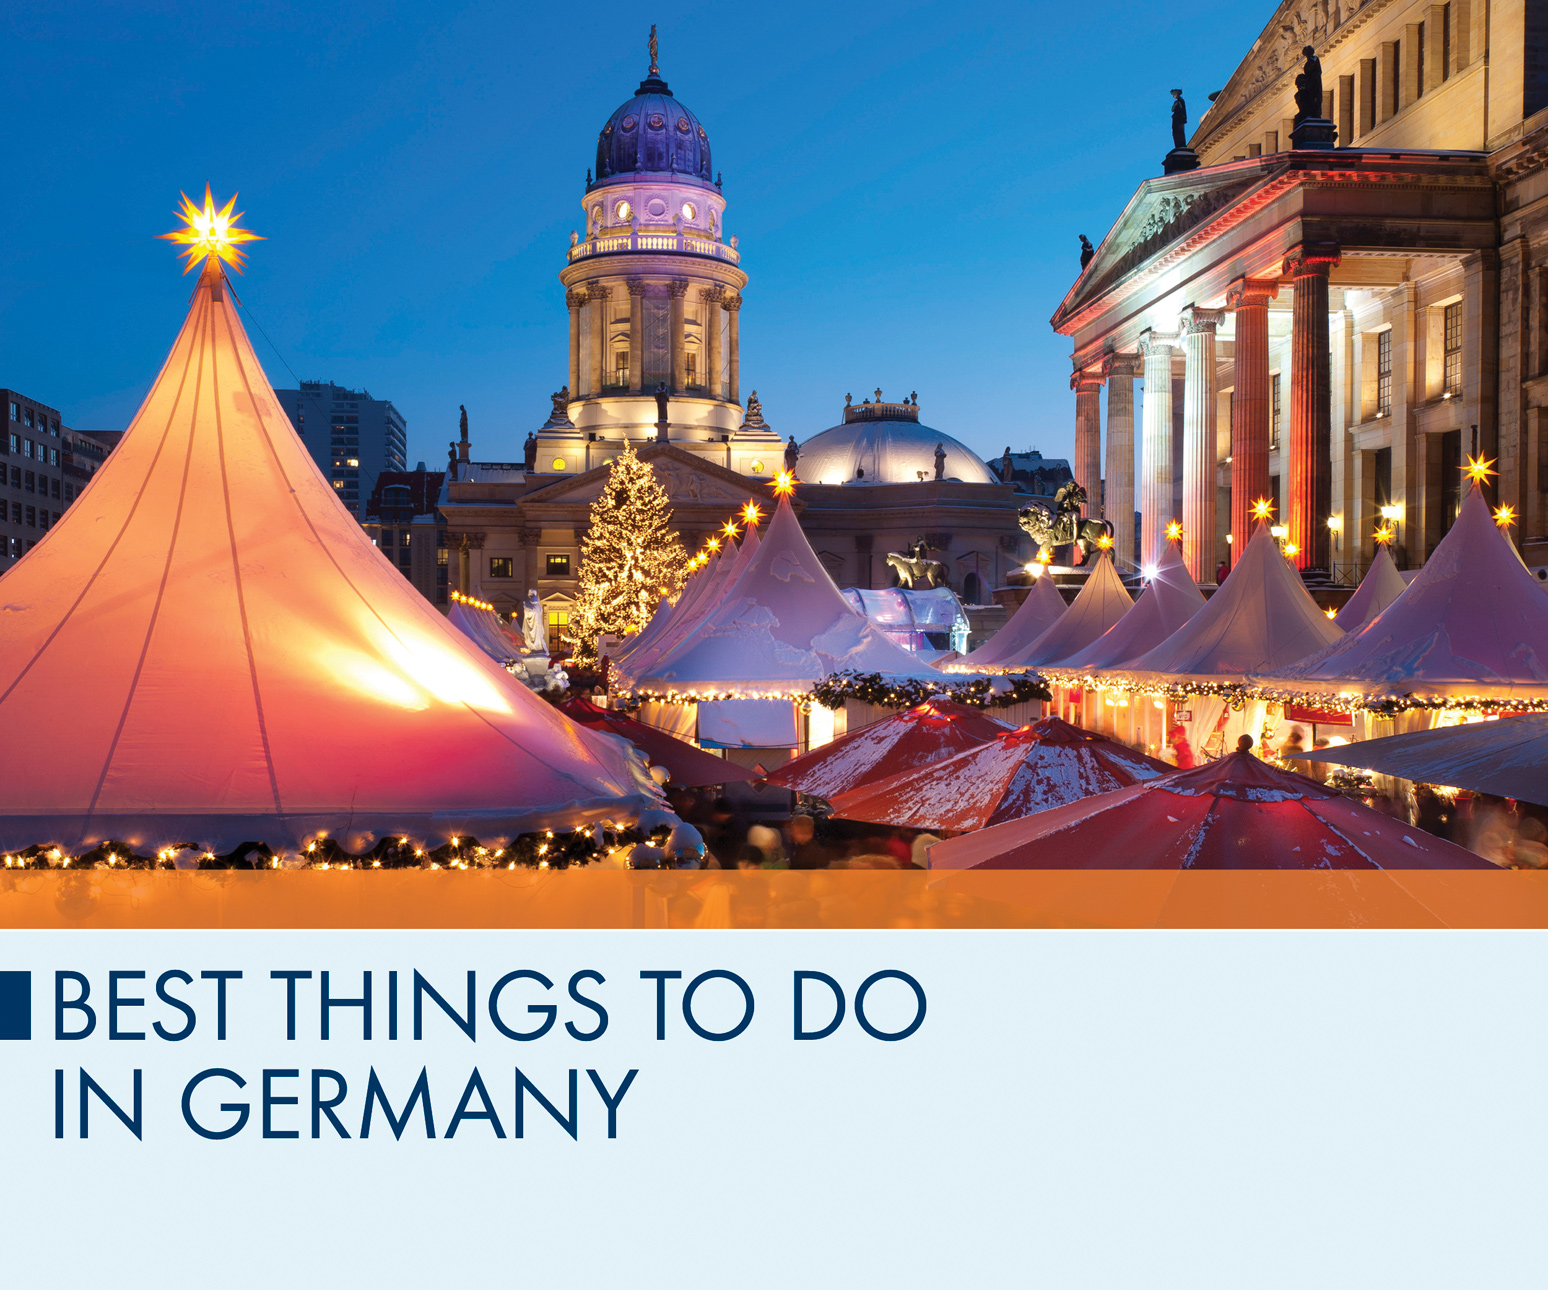 Best Things to Do in Germany